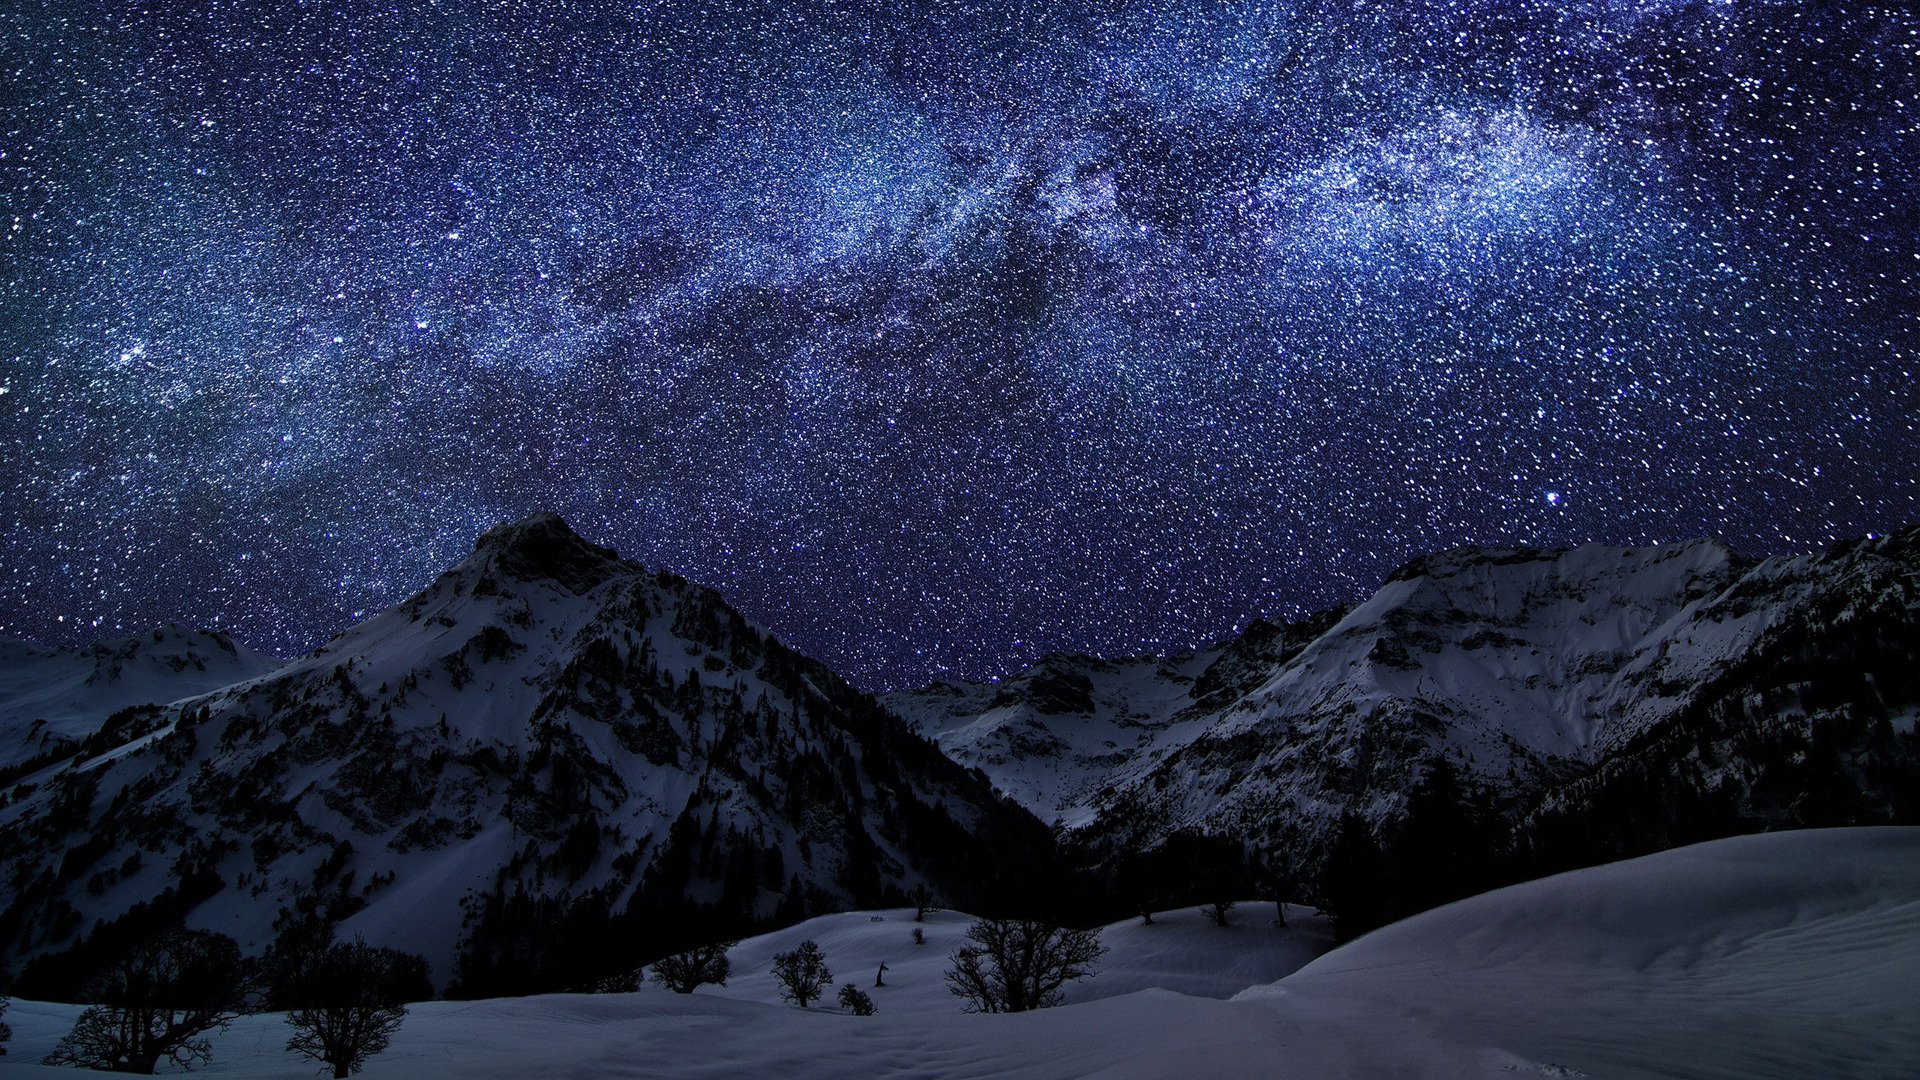 Milky Way above the mountains Wallpaper 6948 1920x1080